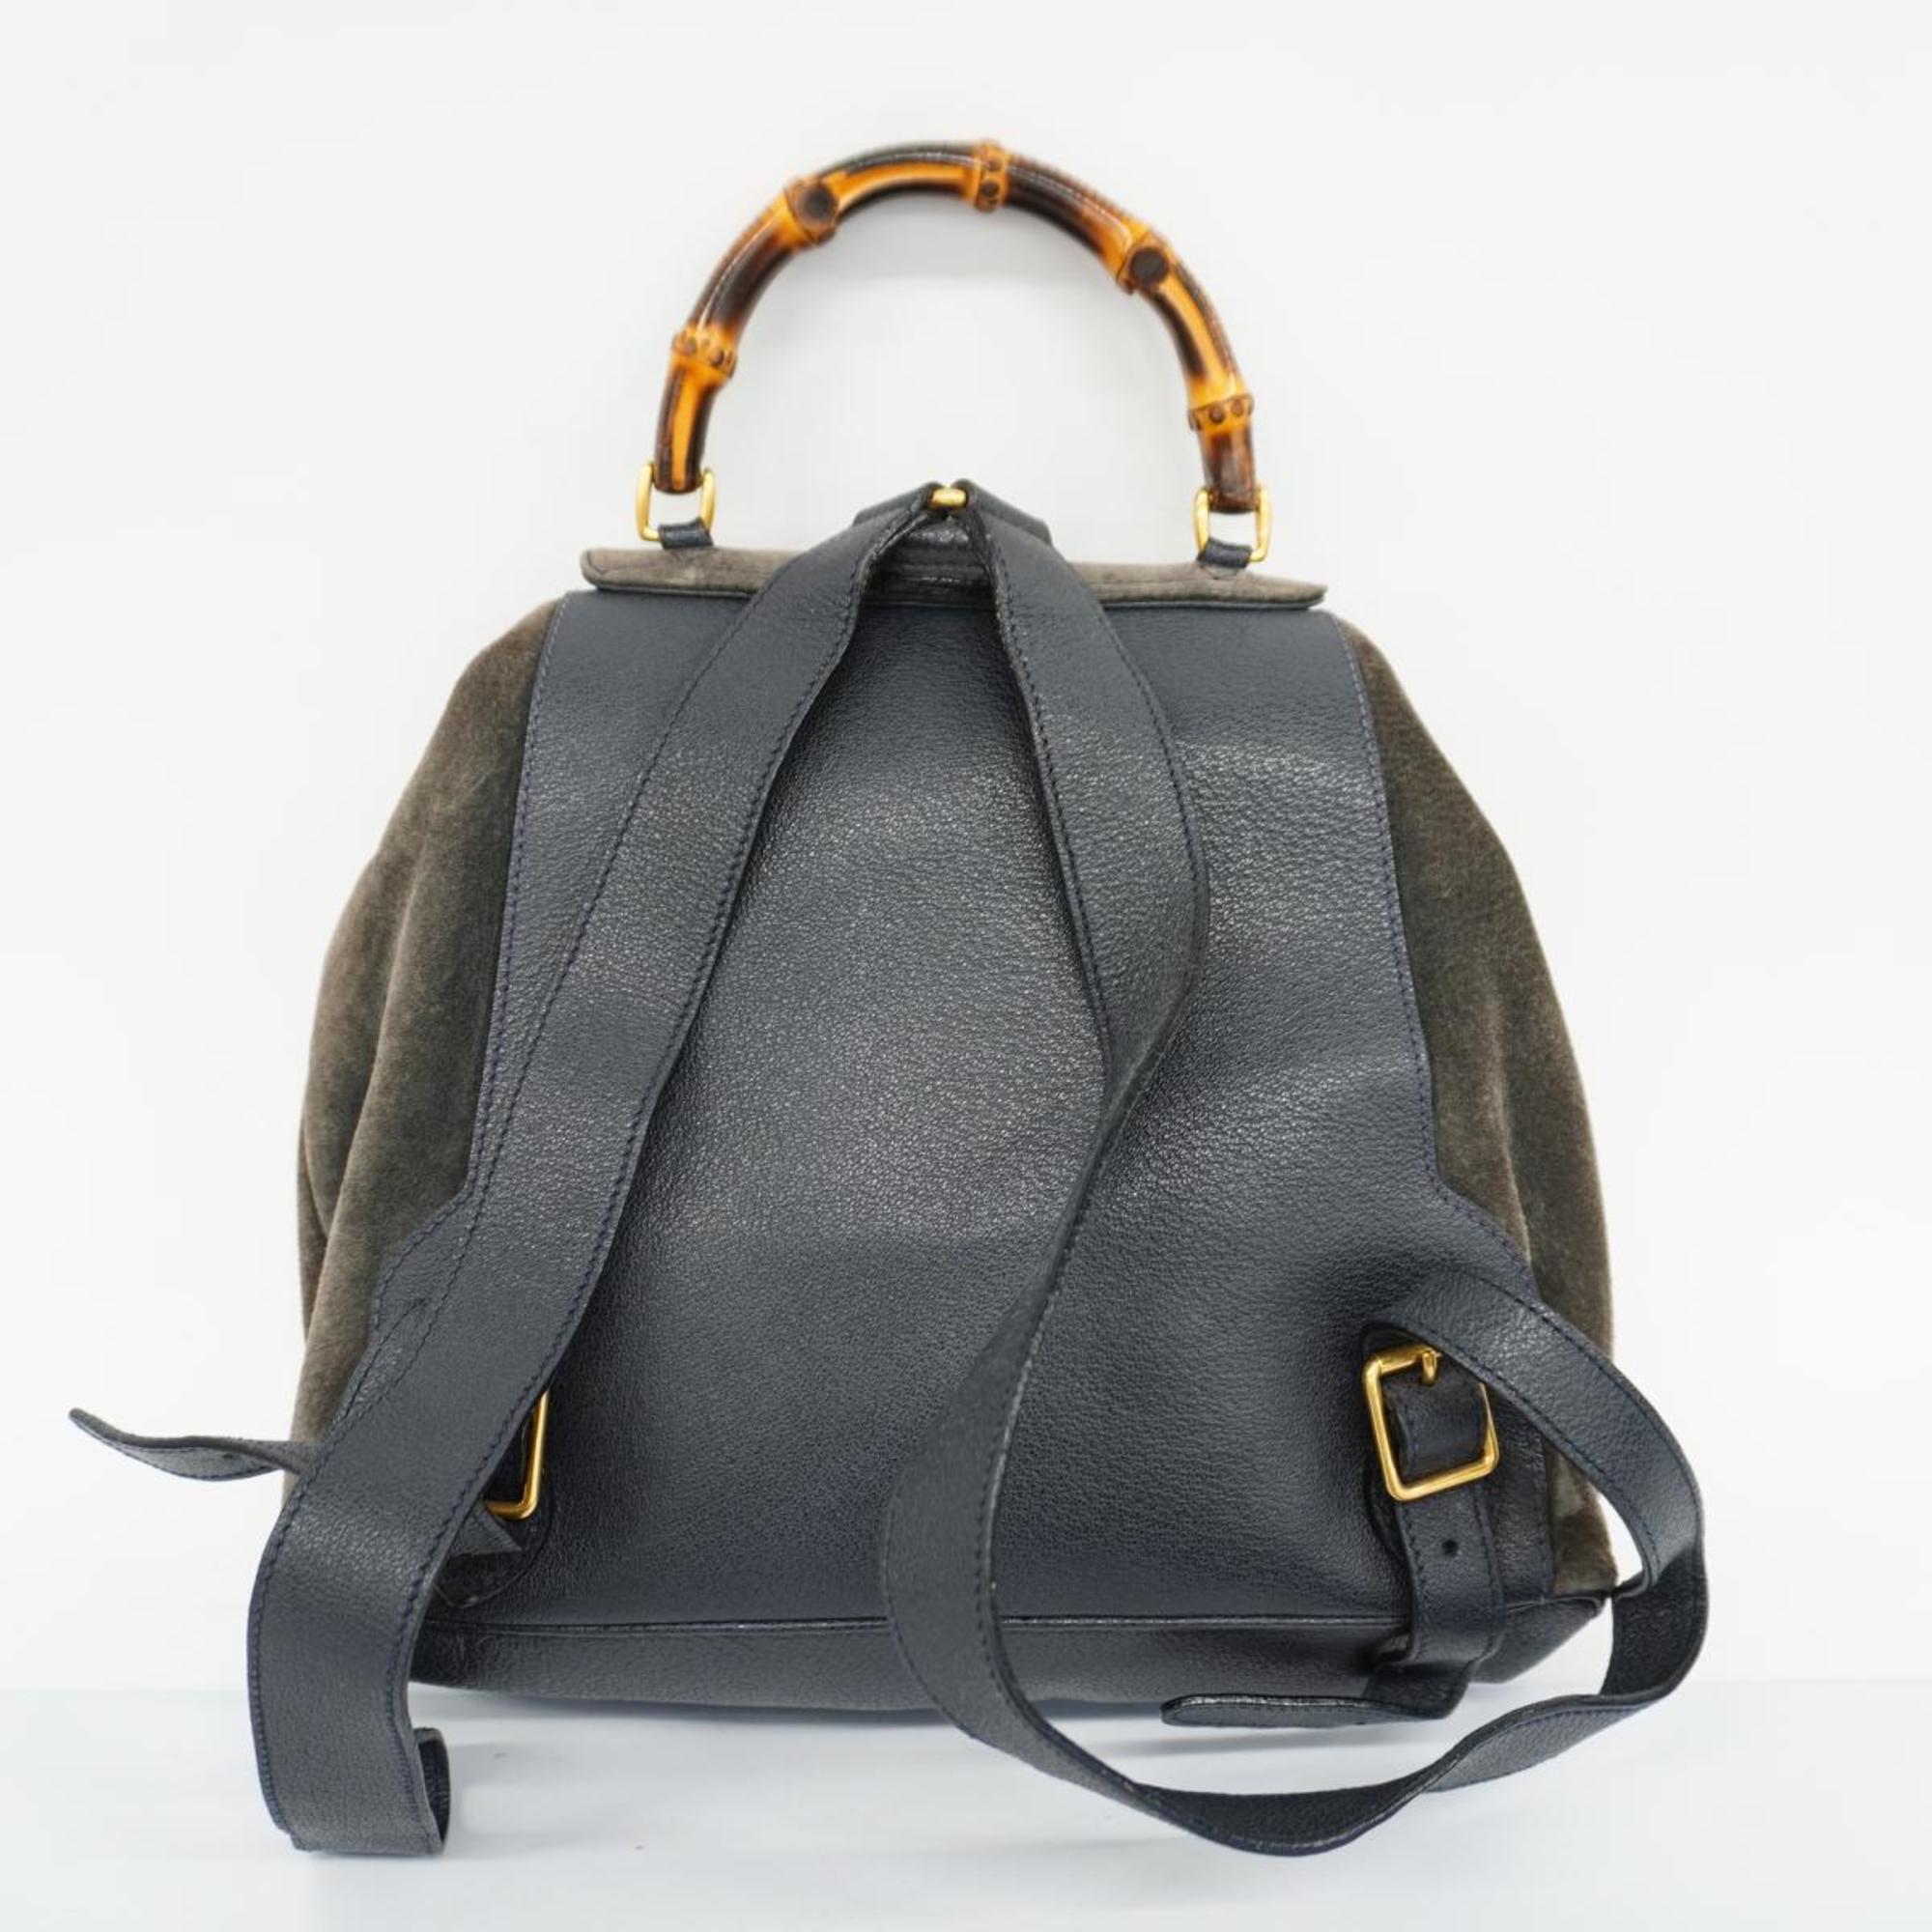 Gucci Backpack Bamboo 003 2058 0016 Suede Navy Men's Women's